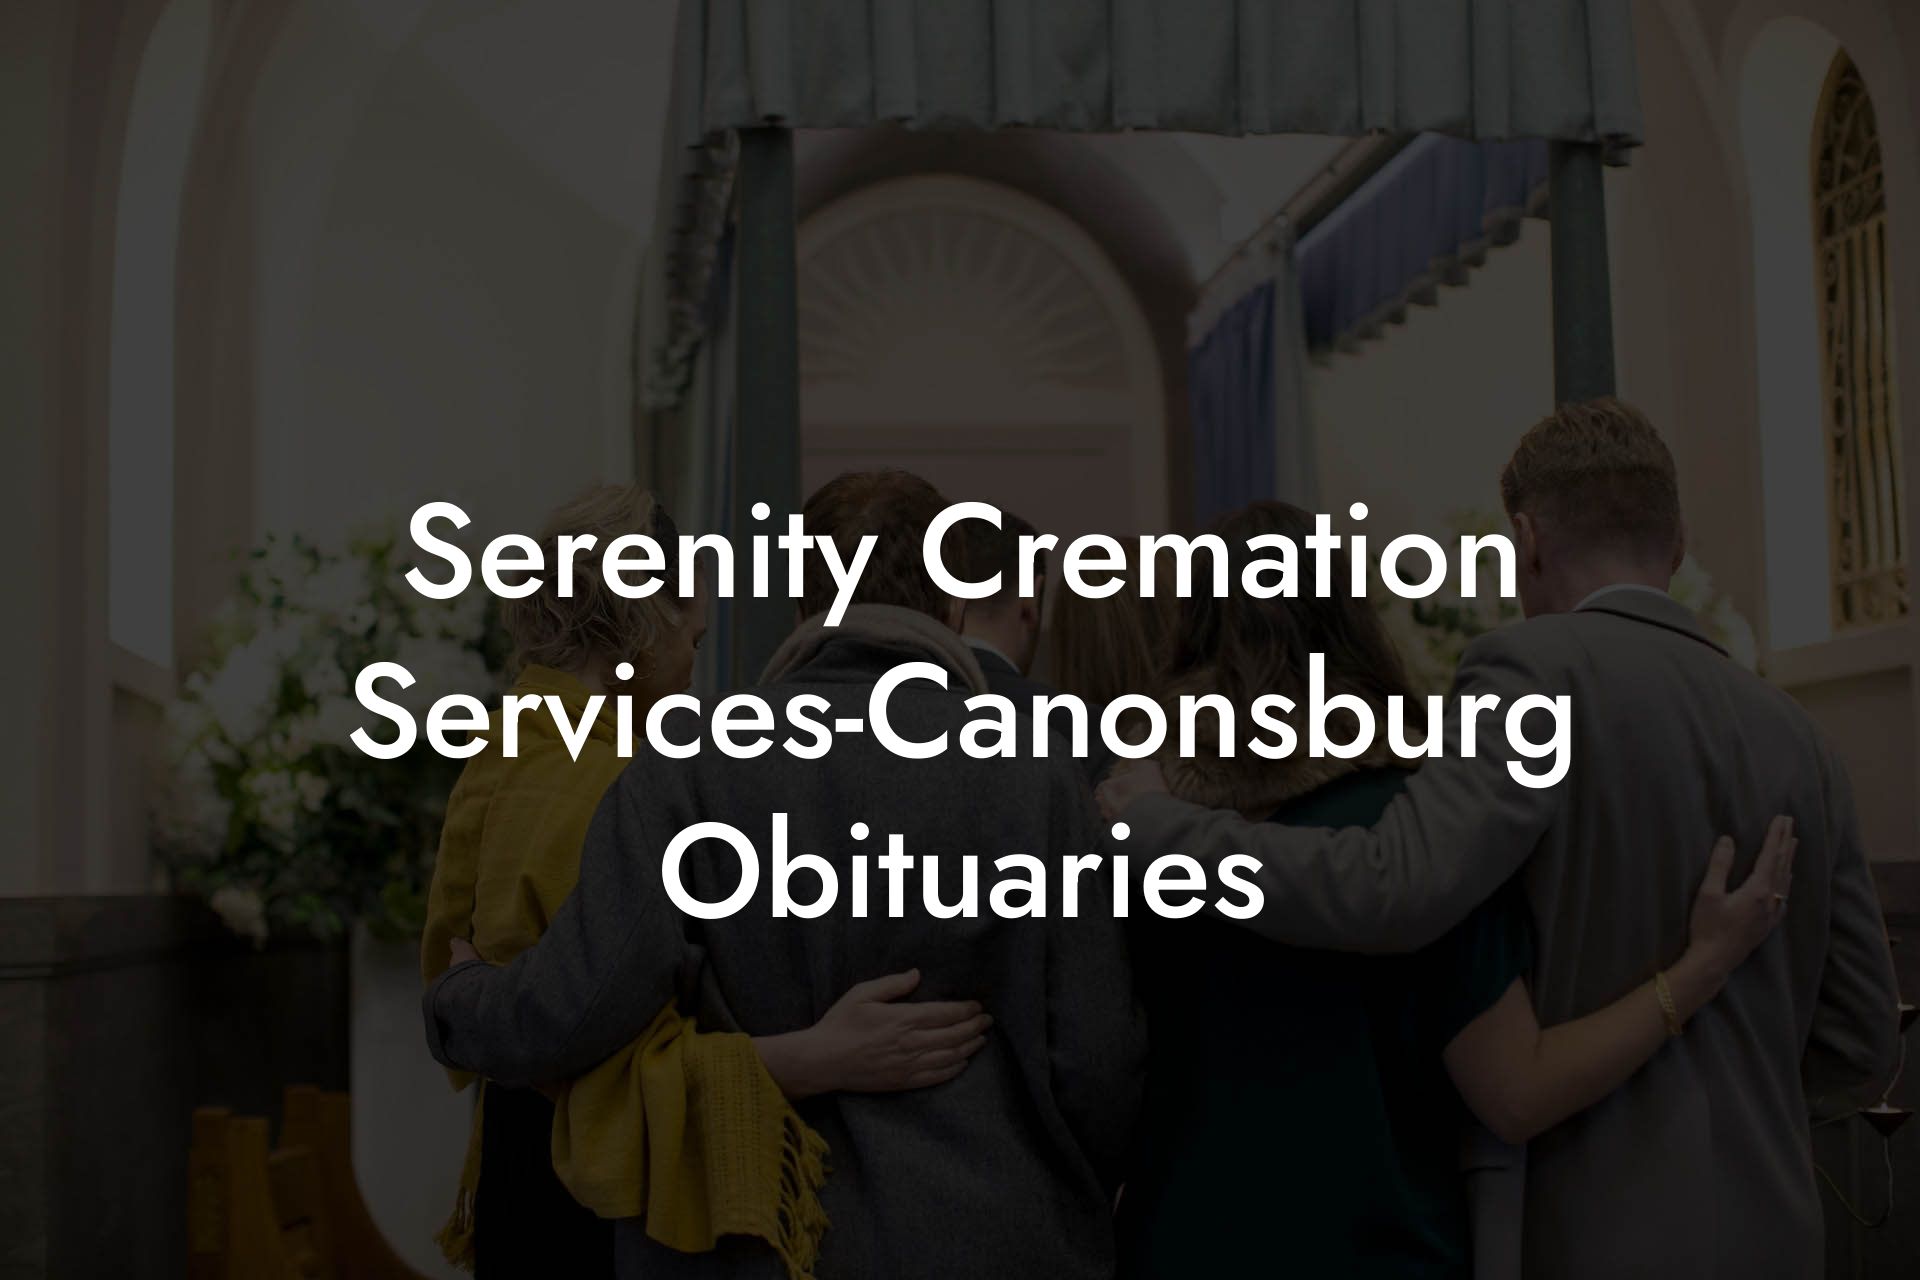 Serenity Cremation Services-Canonsburg Obituaries